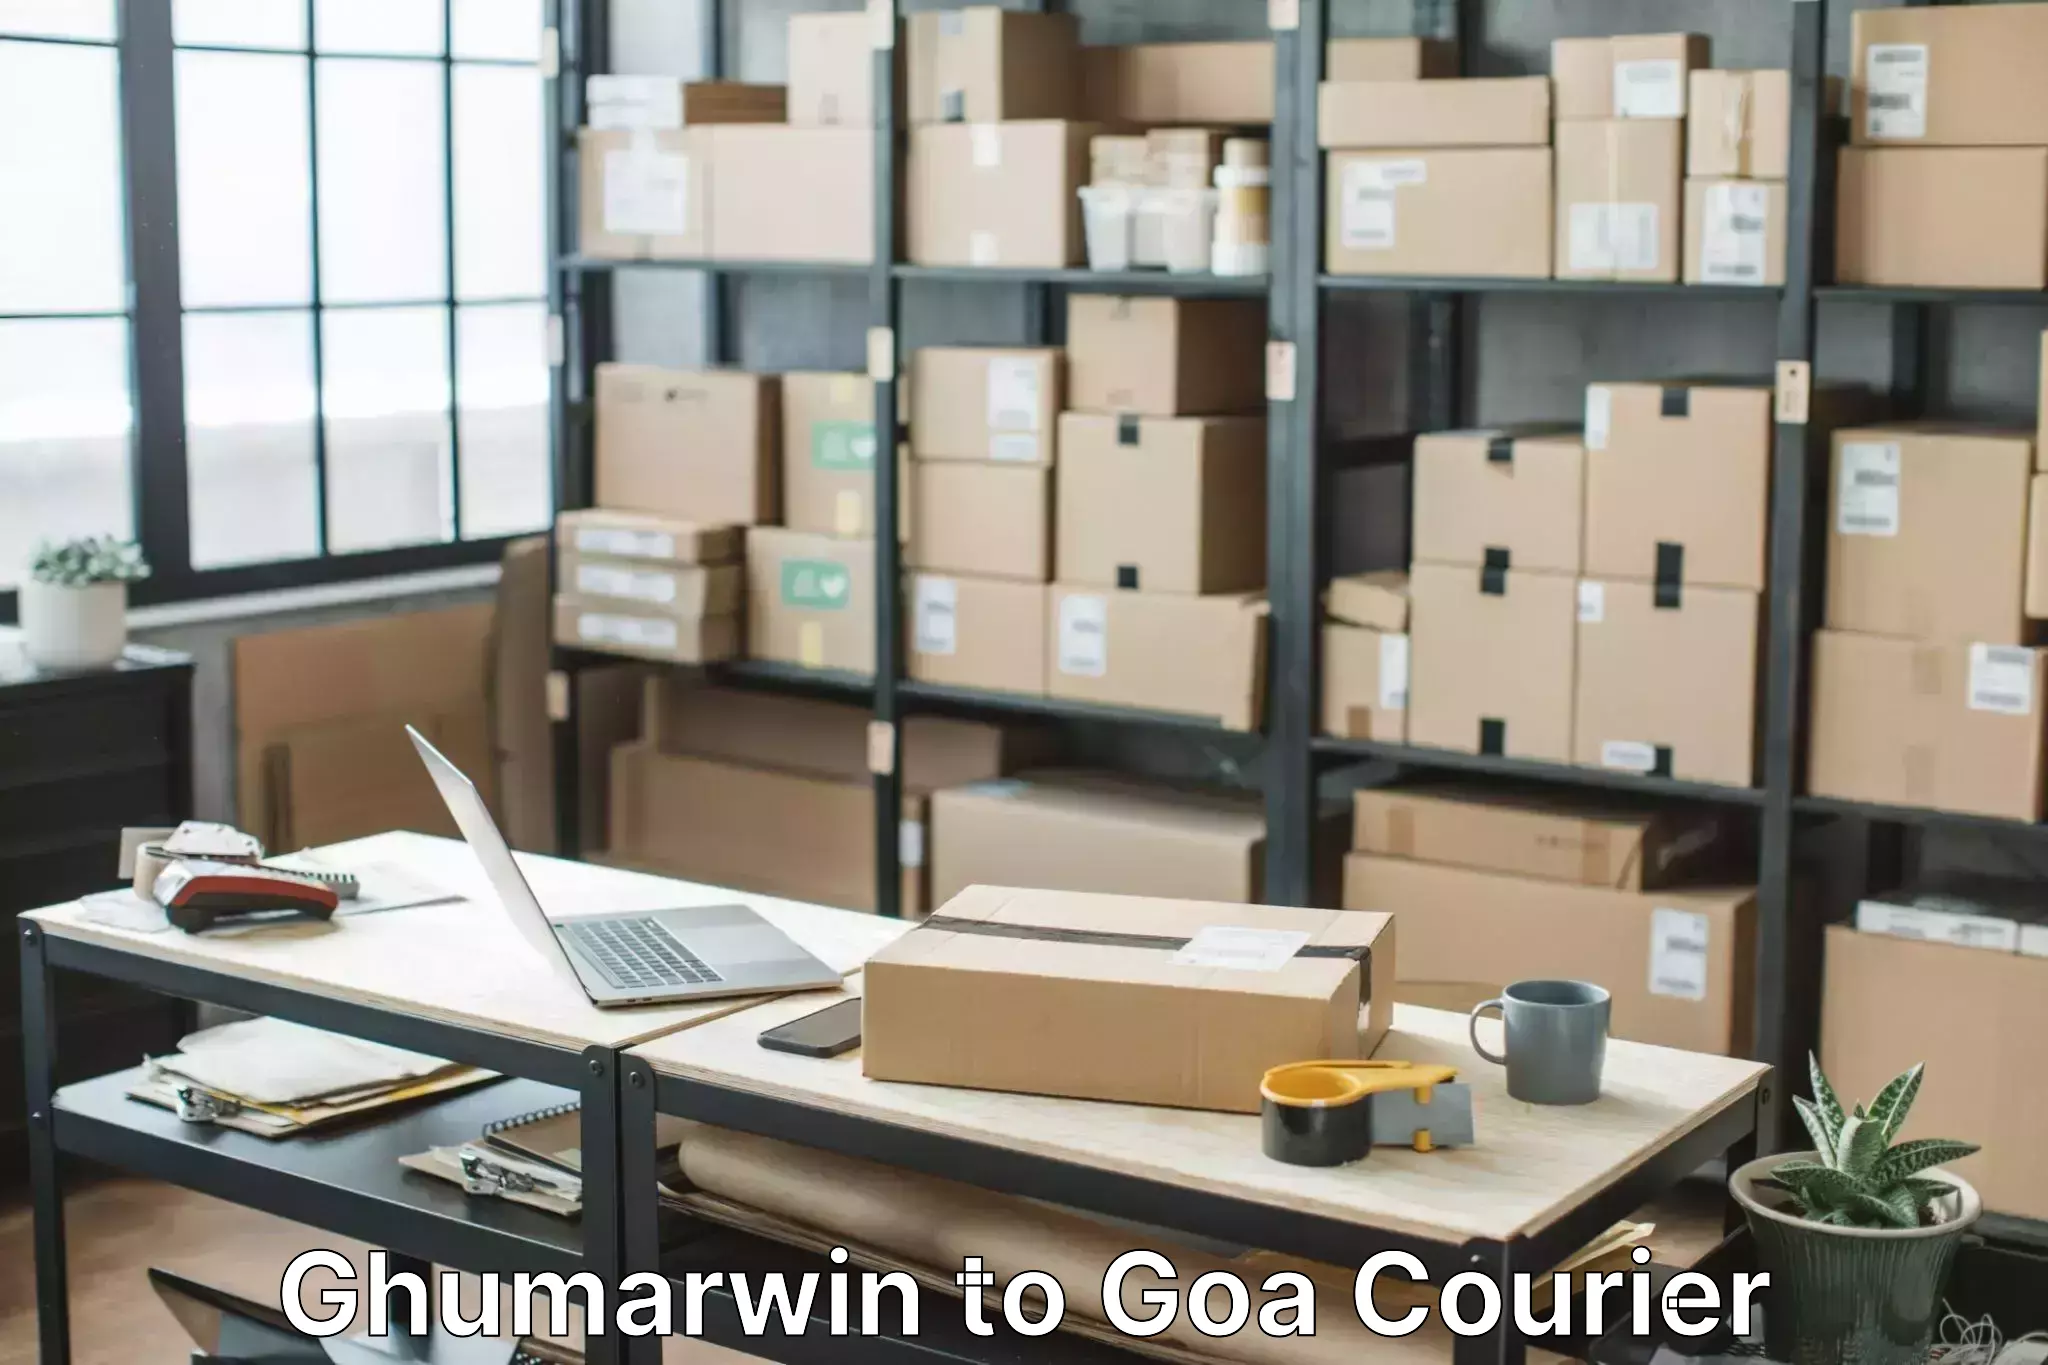 Comprehensive relocation services Ghumarwin to South Goa